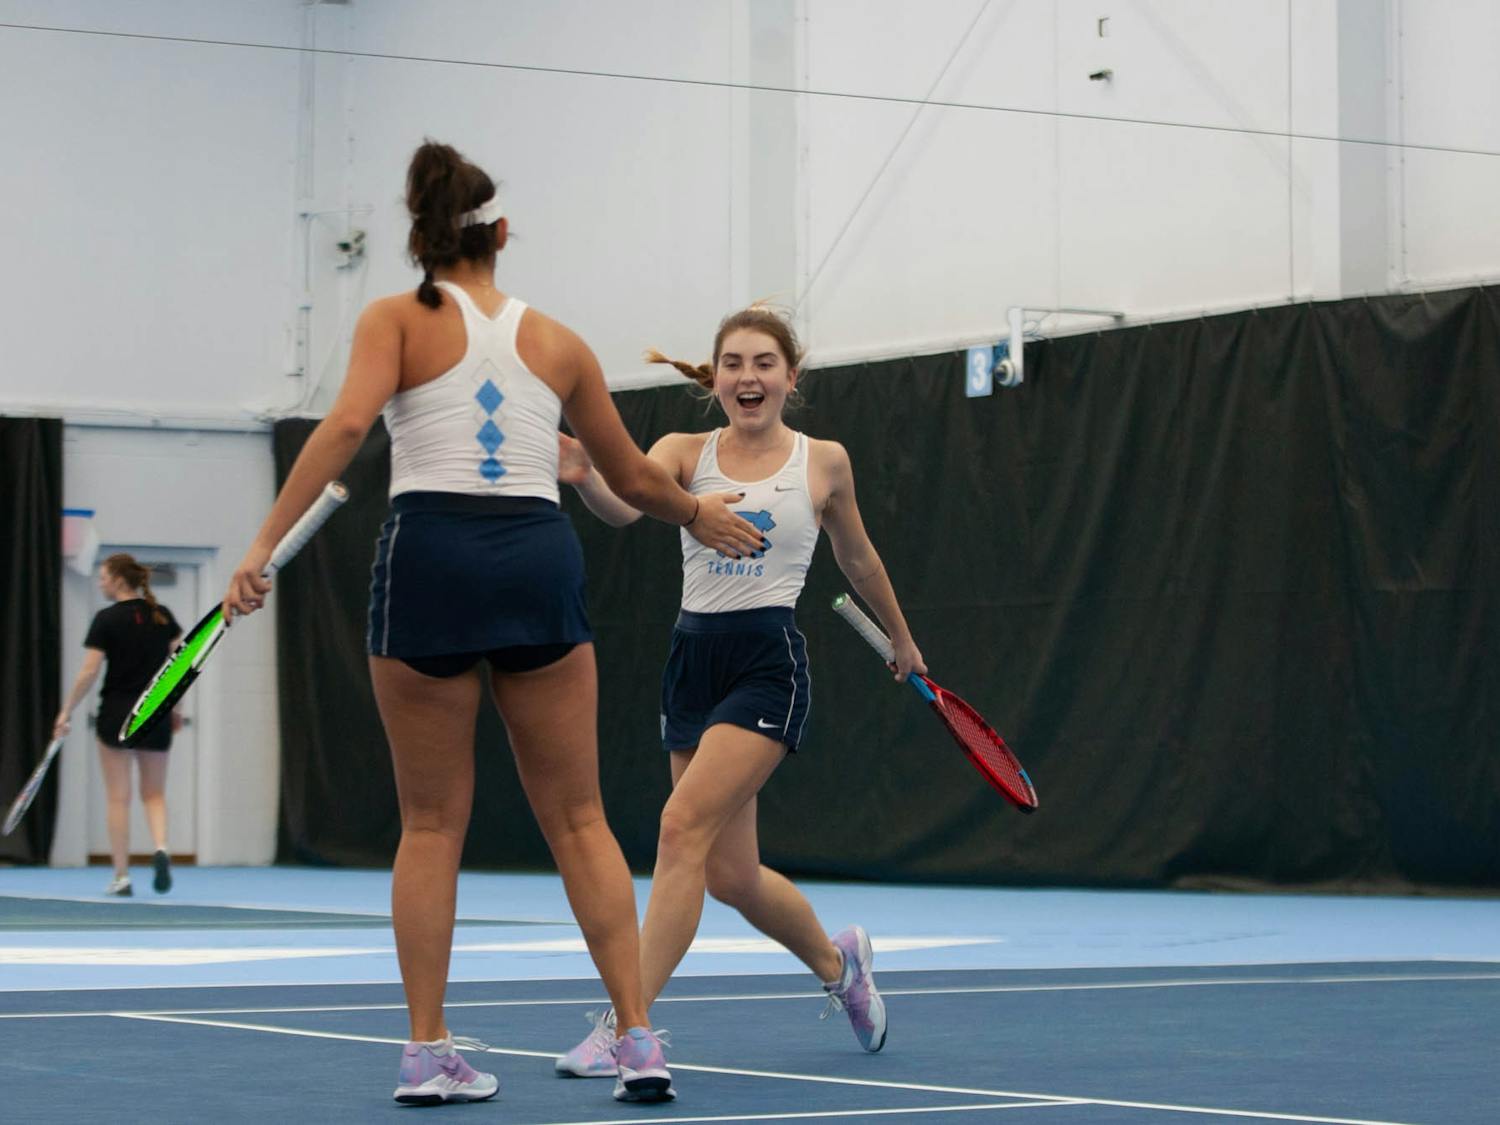 UNC Junior Fiona Crawley and Sophmore Carson Tanguilig celbrate a set win during the Tar Heel 4-0 victory over the Maryland Terrapins in the women's tennis matches on Friday, Jan 27 2023 at The Cone-Kenfield Tennis Center.